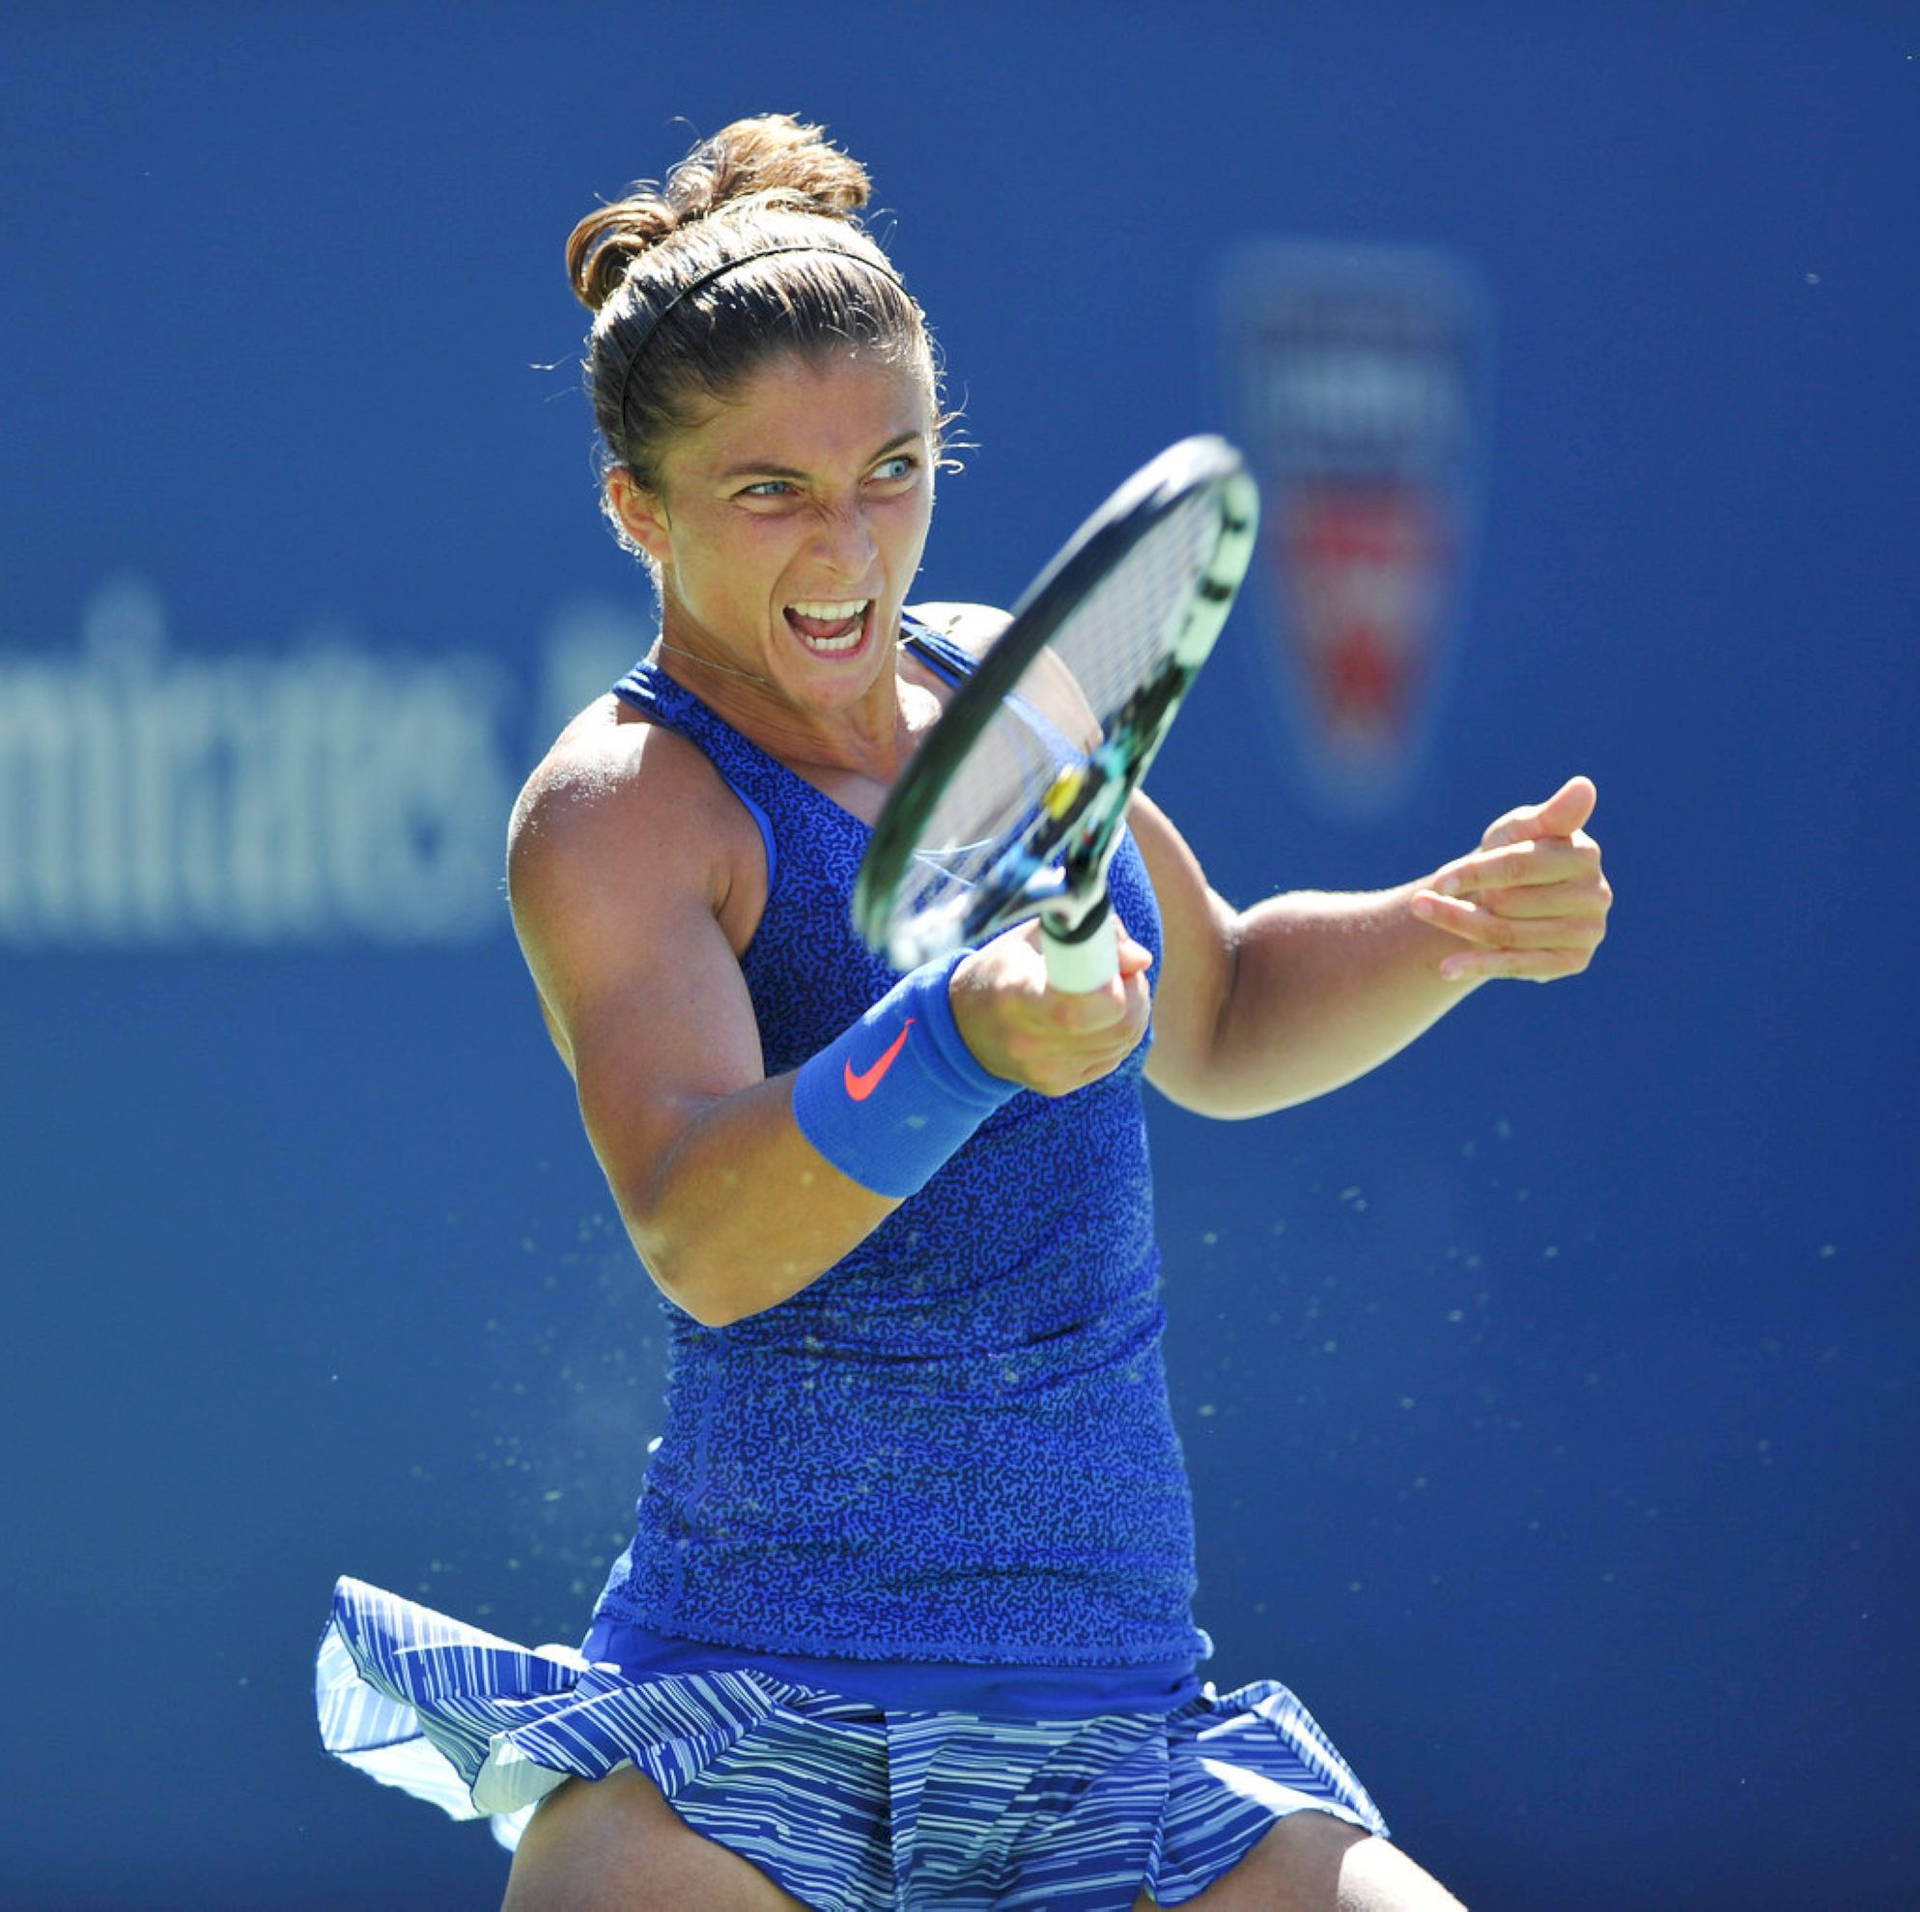 Italian professional tennis player Sara Errani showcasing a committed expression during a match. Wallpaper